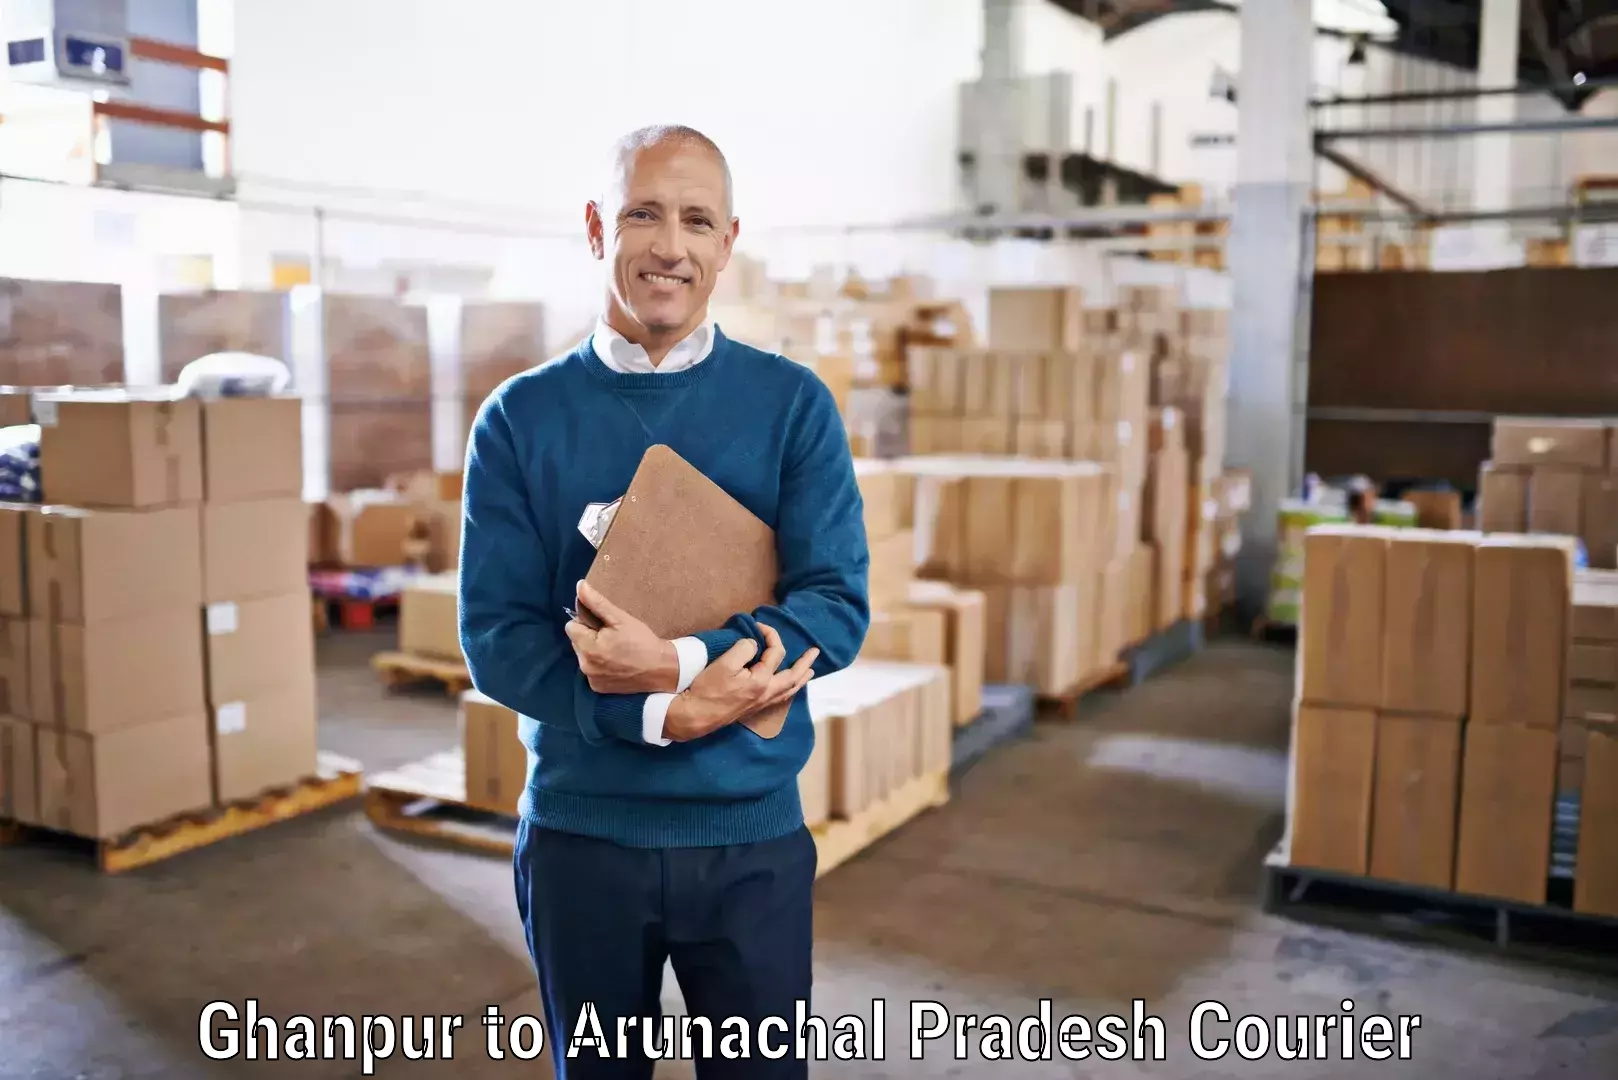 Express delivery capabilities Ghanpur to Arunachal Pradesh